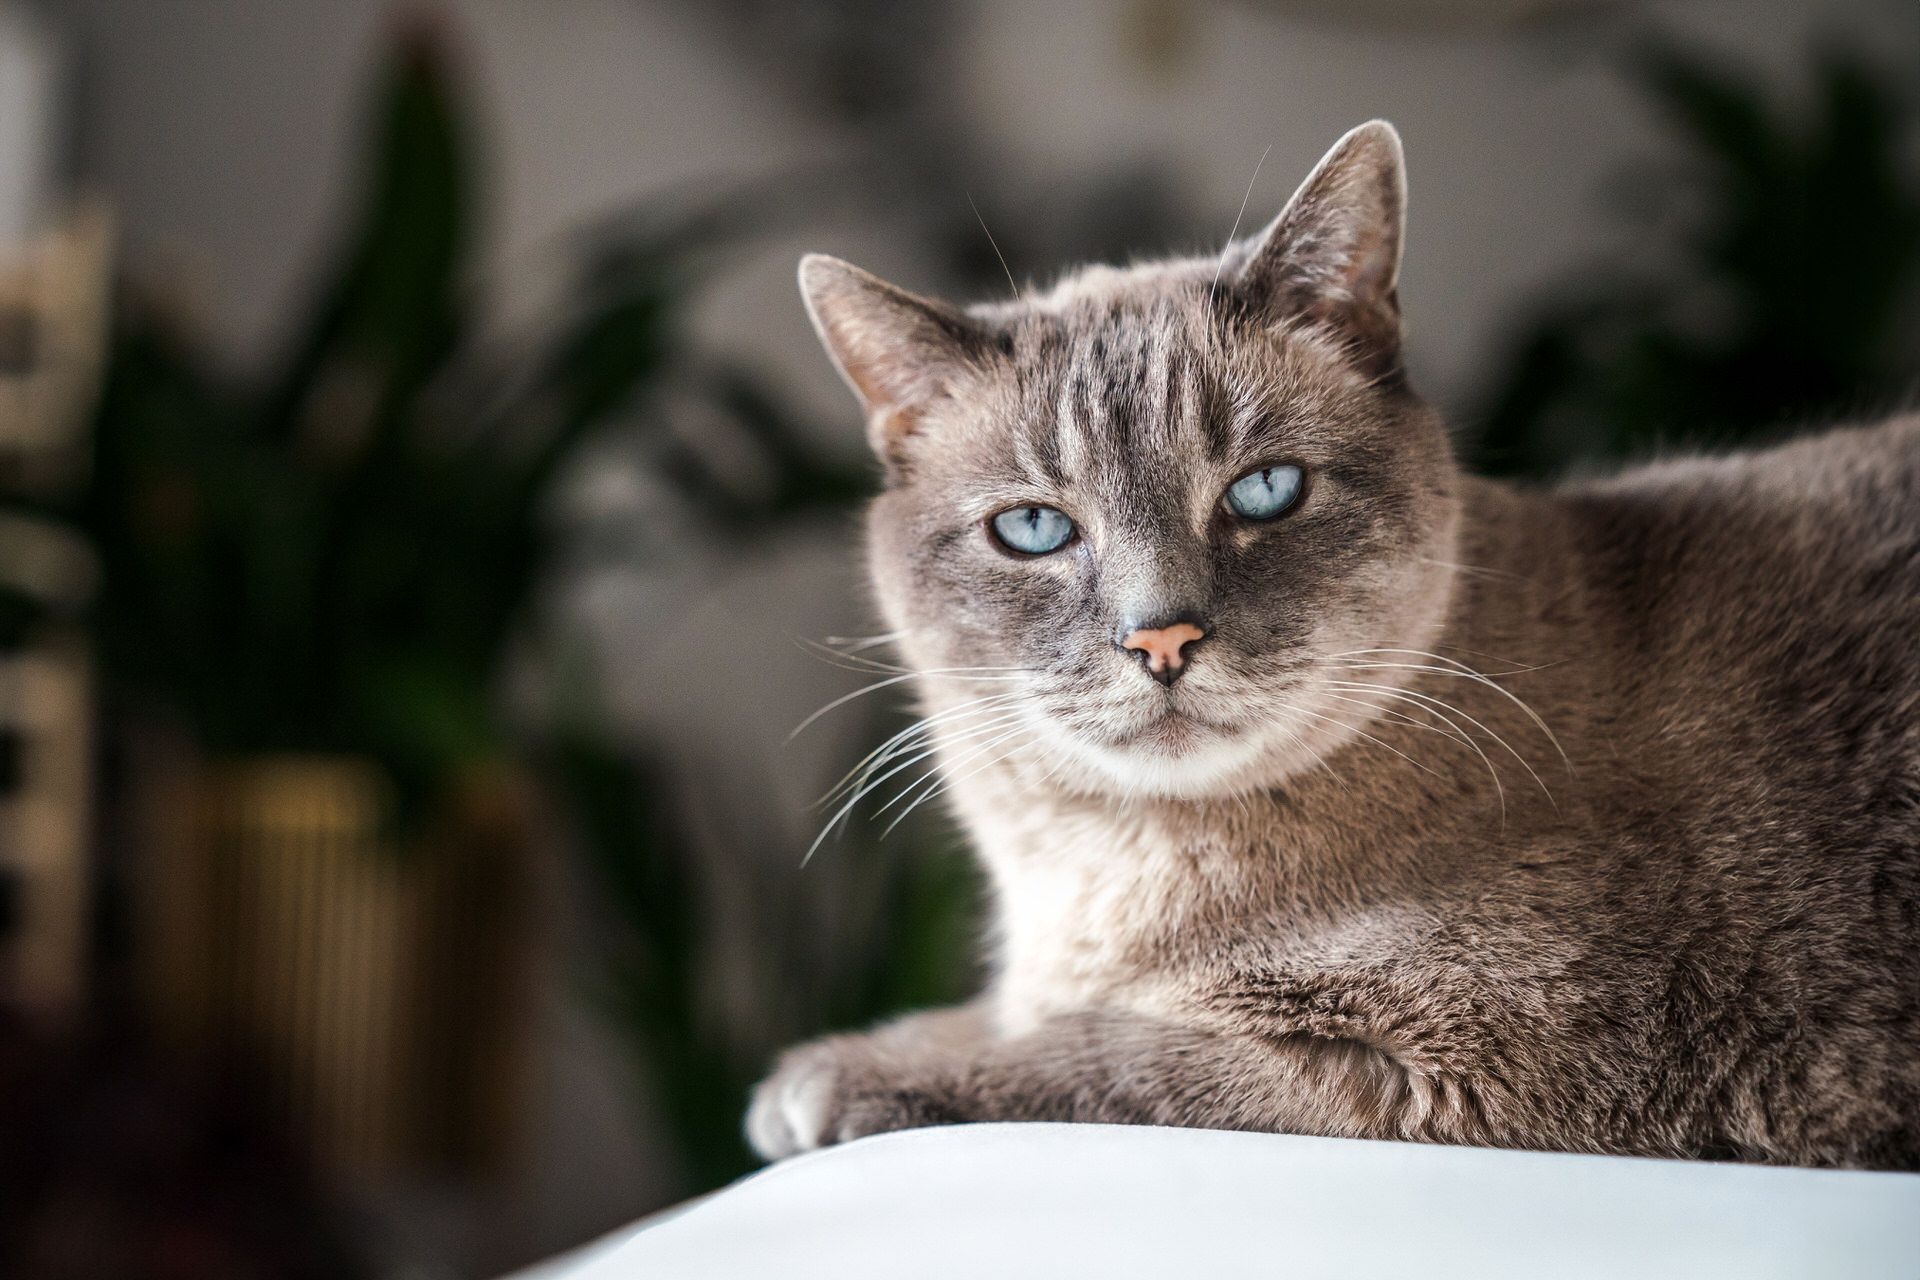 Blue-eyed gray cat lounging indoors.